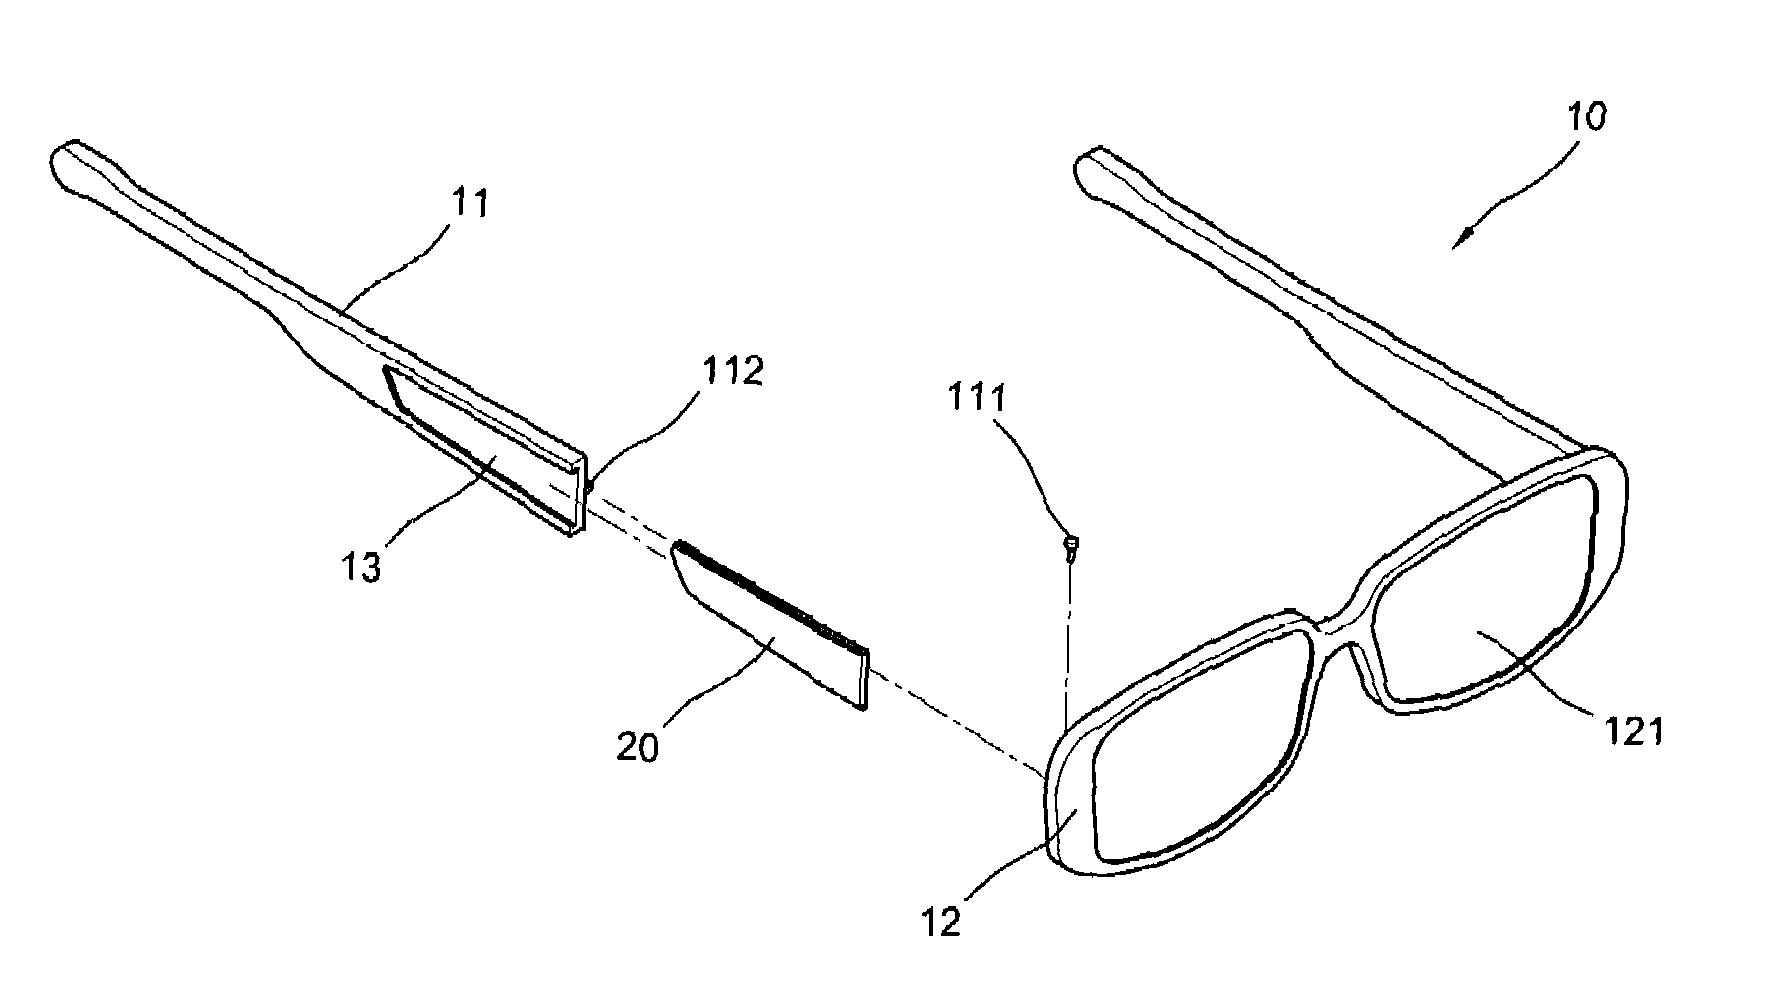 Spectacles for attaching decorative labels